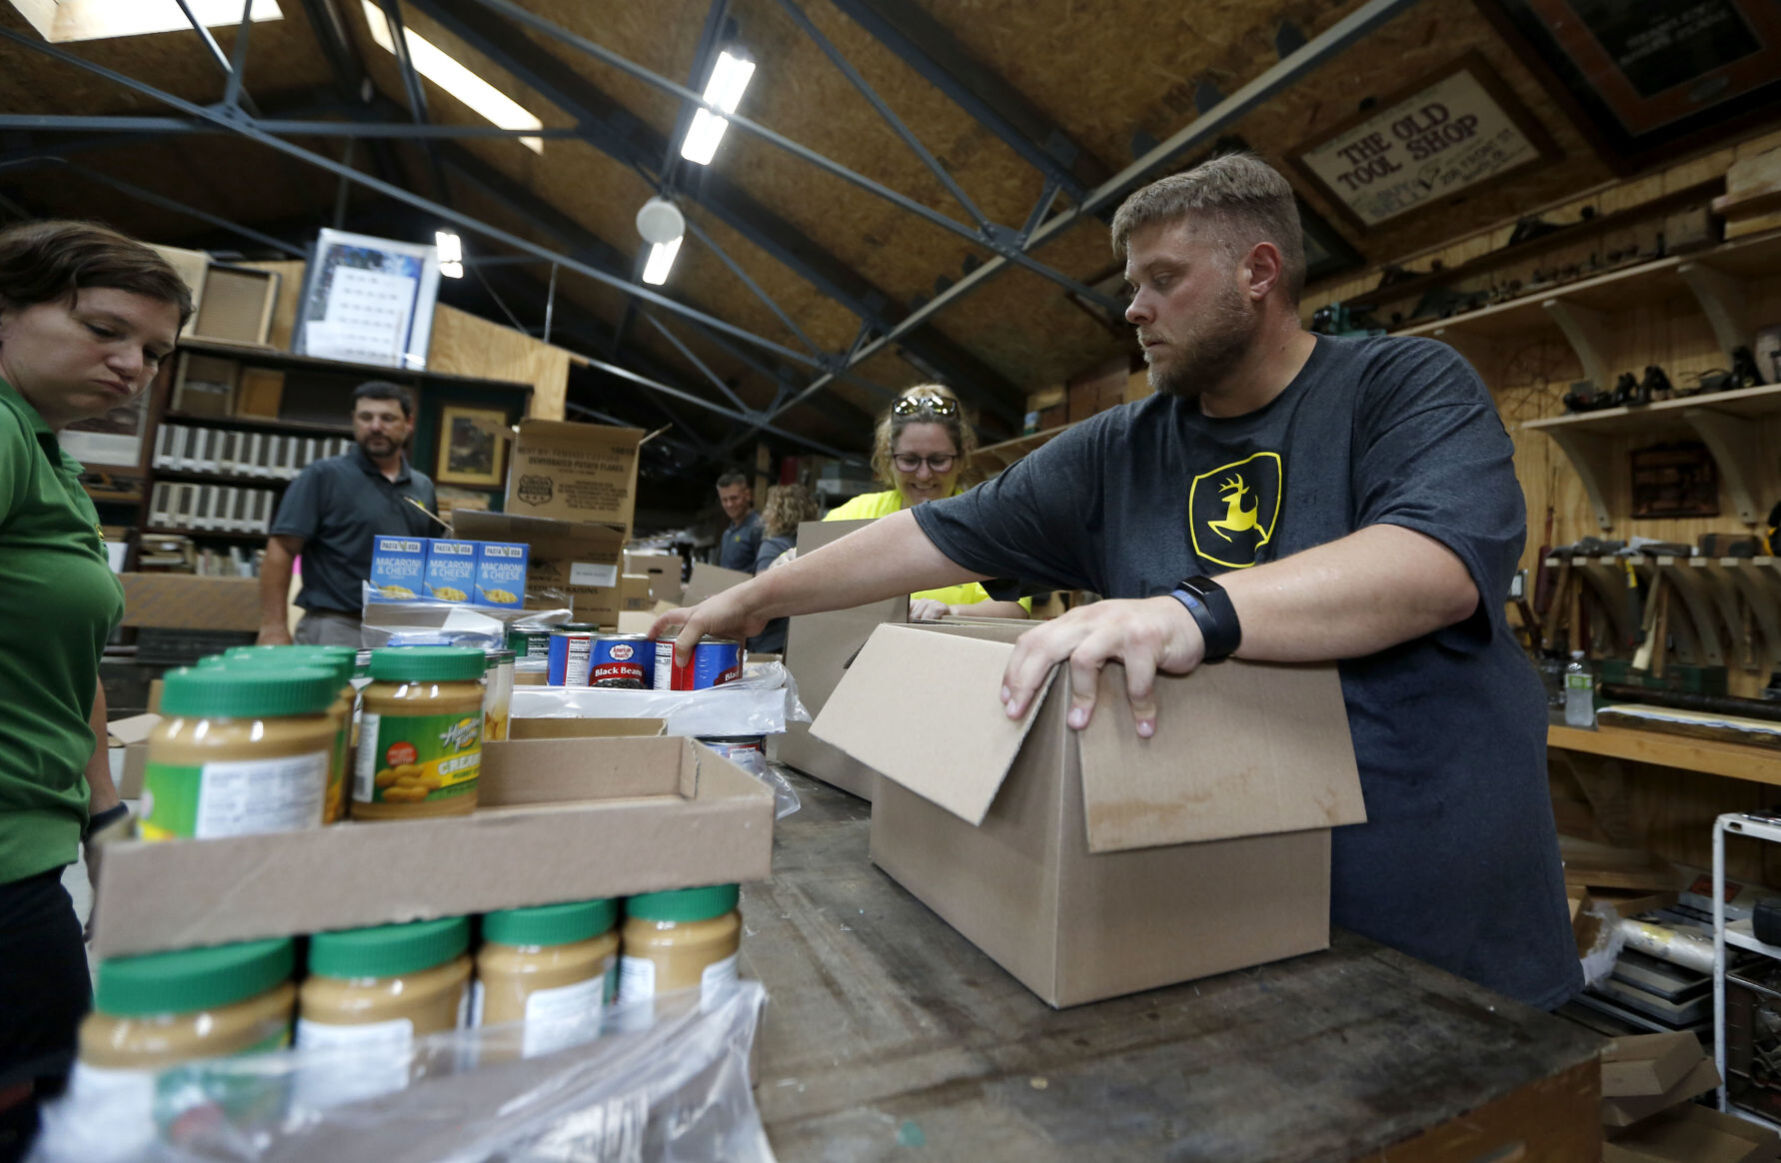 David Yeager, a volunteer with John Deere, packages food pantry boxes during an event at Convivium Urban Farmstead on Thursday, June 17, 2021. PHOTO CREDIT: Katie Goodale